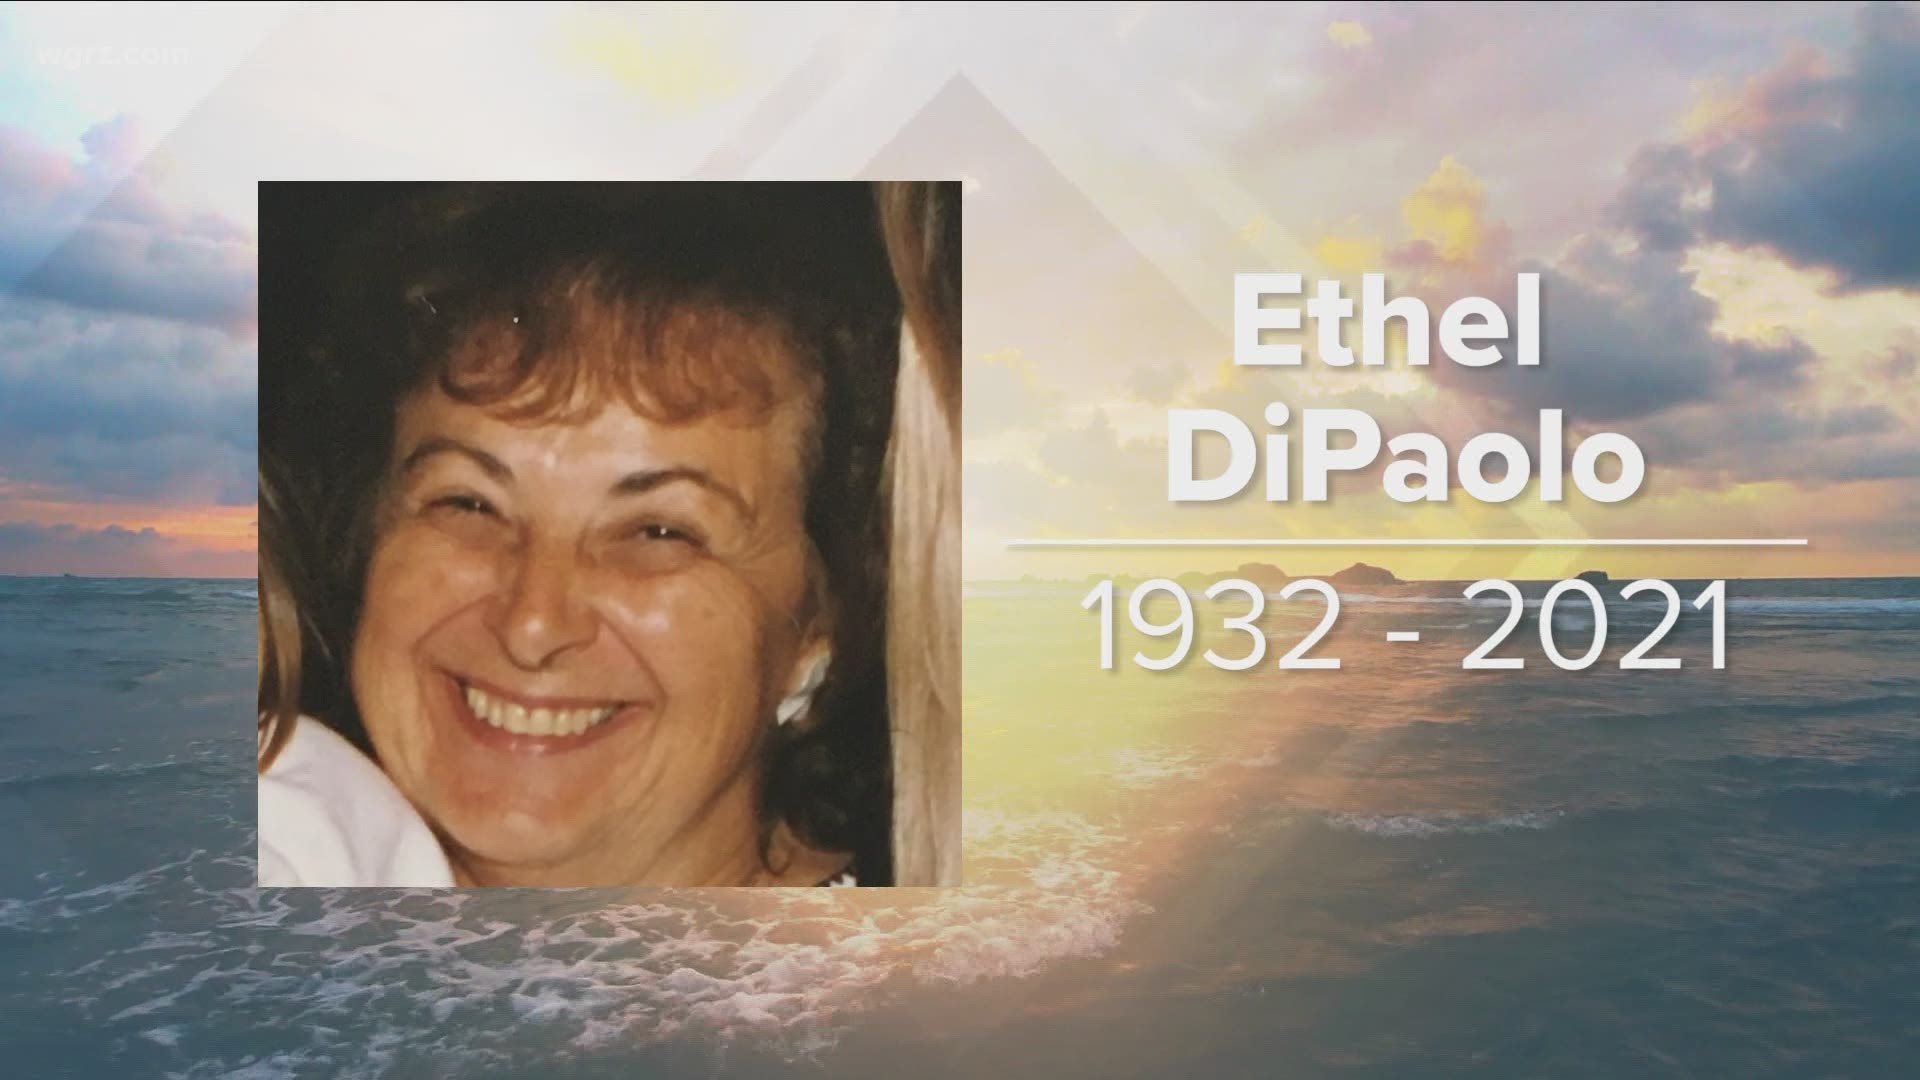 Ethel DiPaolo passed away on March 21, after a brief period of declining health, and after a life well lived.